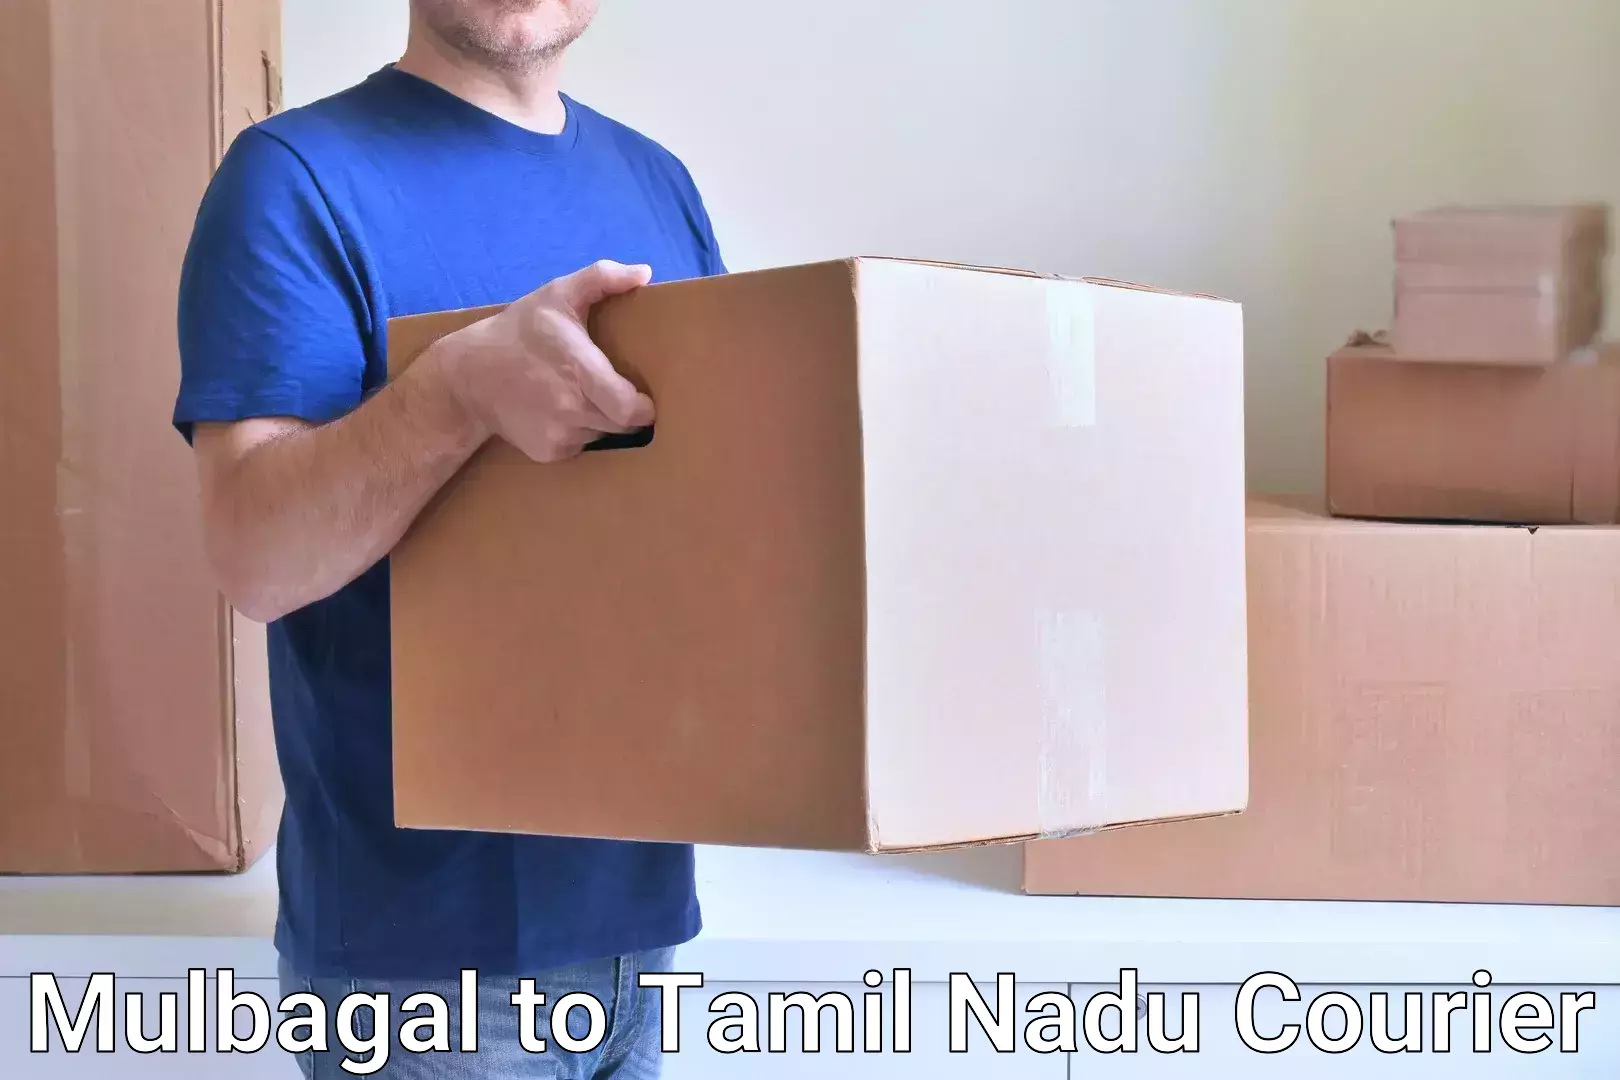 Courier app Mulbagal to Tuticorin Port